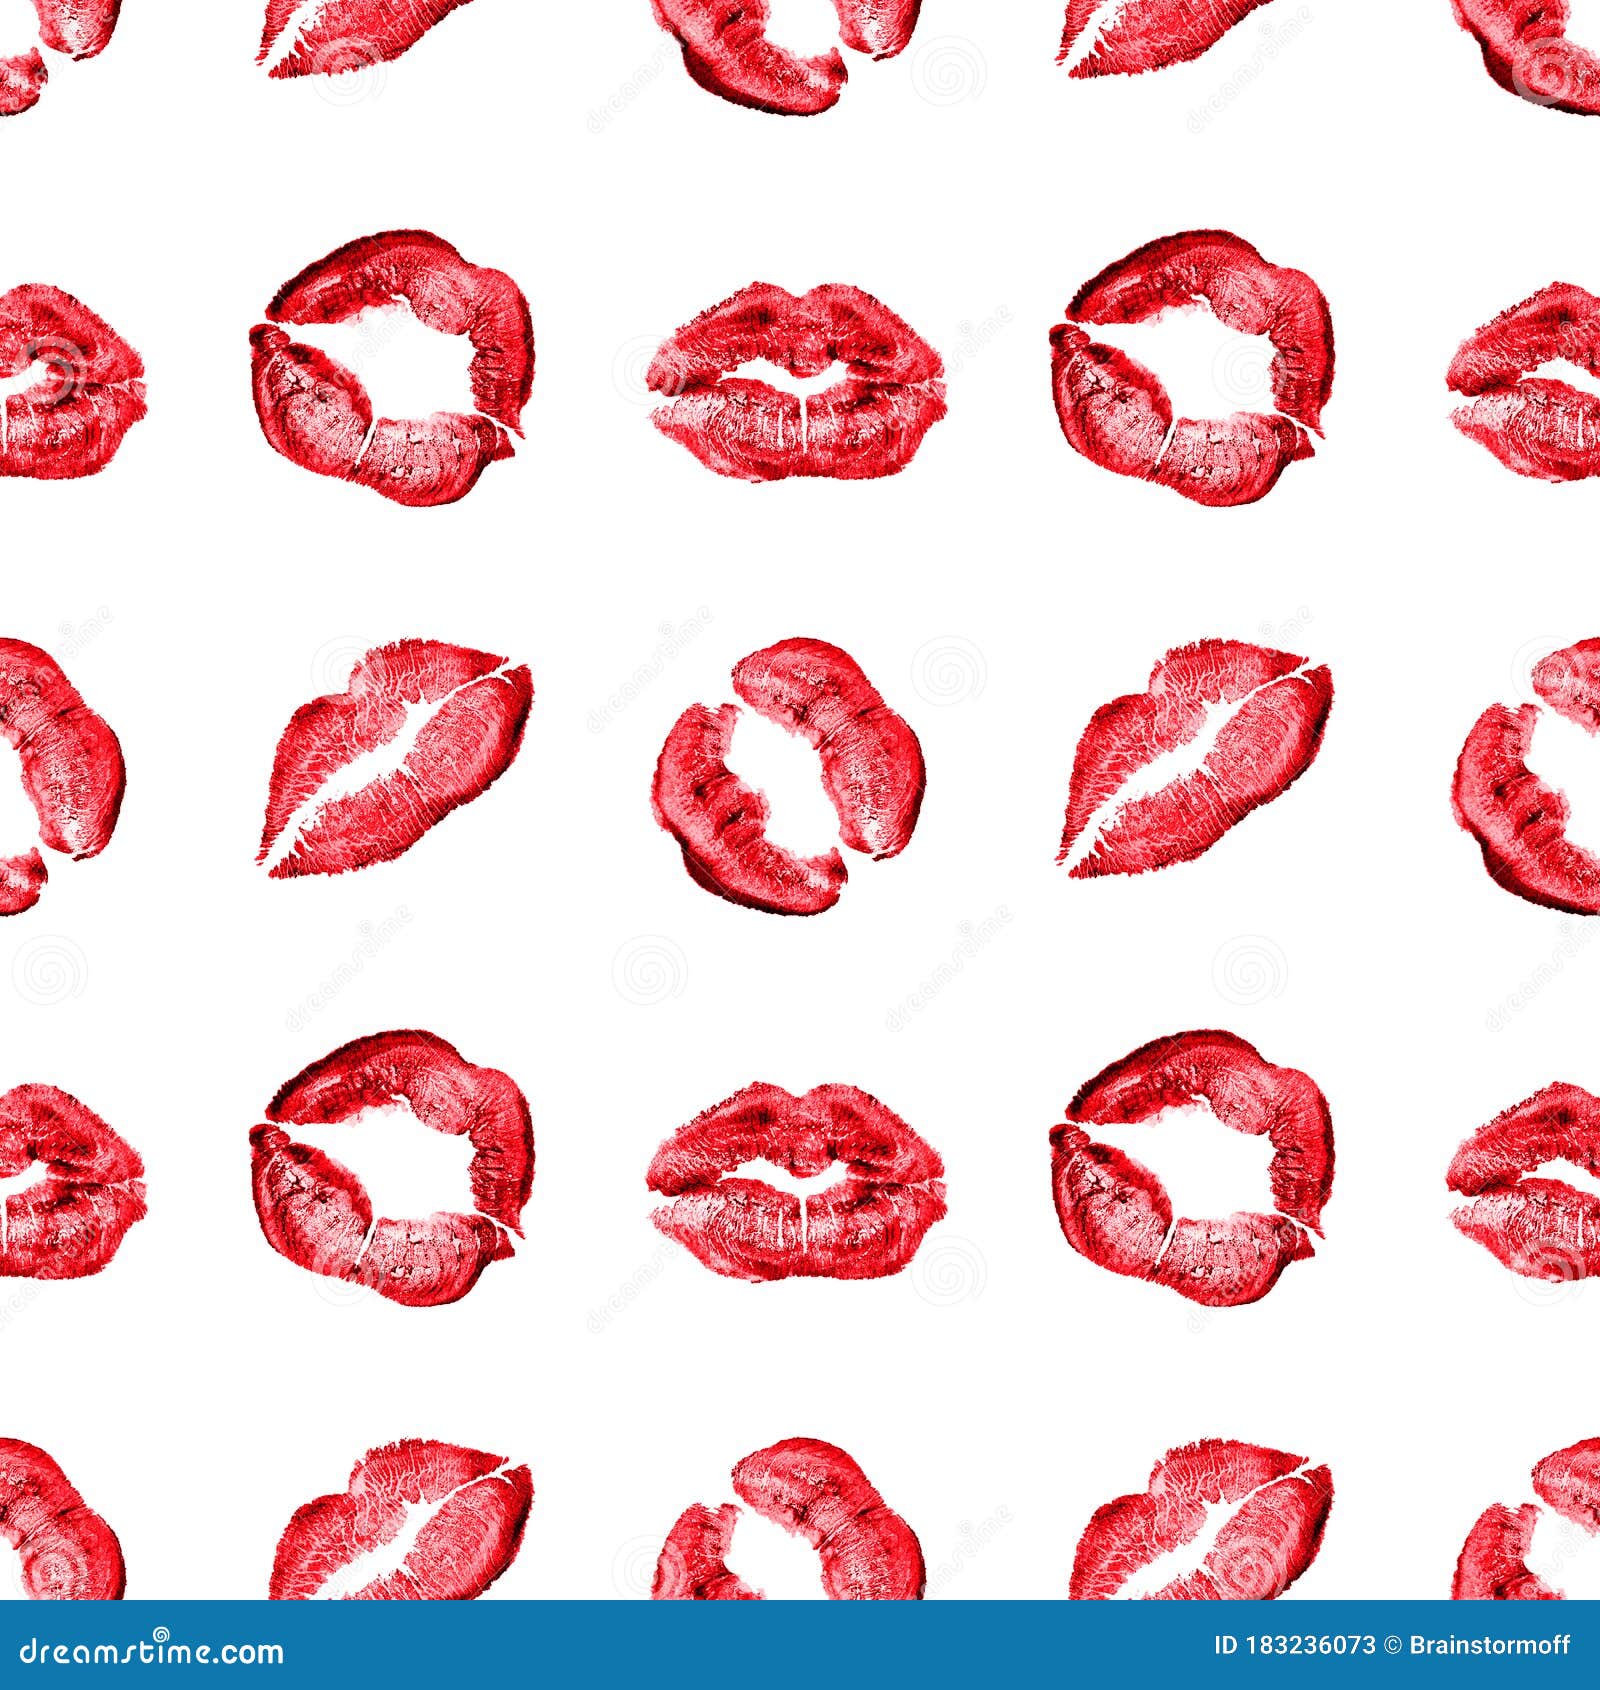 Seamless Pattern of Red Lipstick Kiss Print on White Background Isolated,  Pink Lips Makeup Marks Repeating Ornament Stock Image - Image of mouth, lips:  183236073